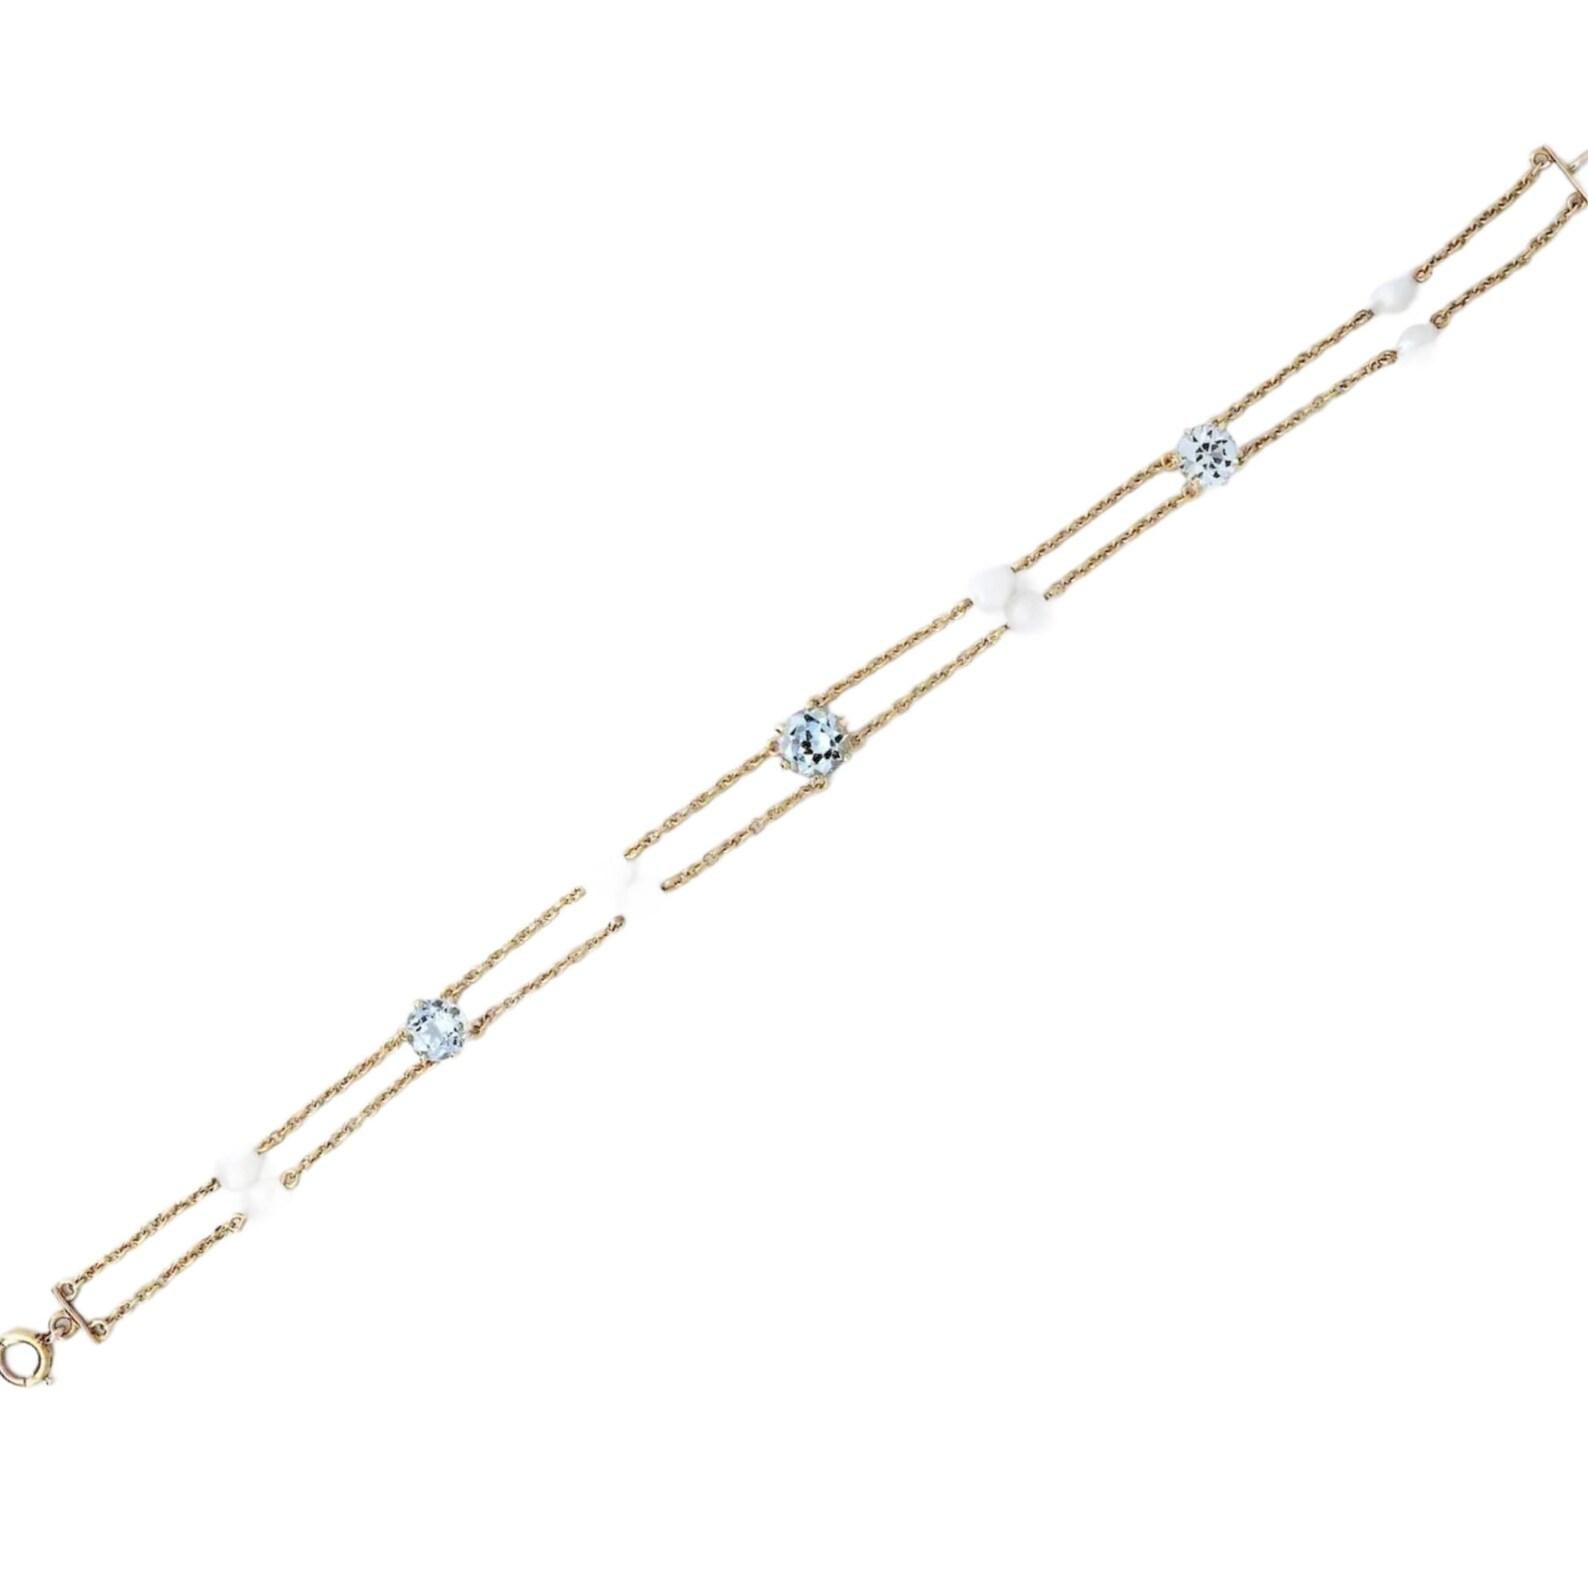 An art nouveau period aquamarine, and natural pearl bracelet in 14 karat yellow gold.

Set with three antique European cut aquamarine of 3.50 carats total weight strung on hand wrought chain links.

Accented by eight natural pearls of approximately